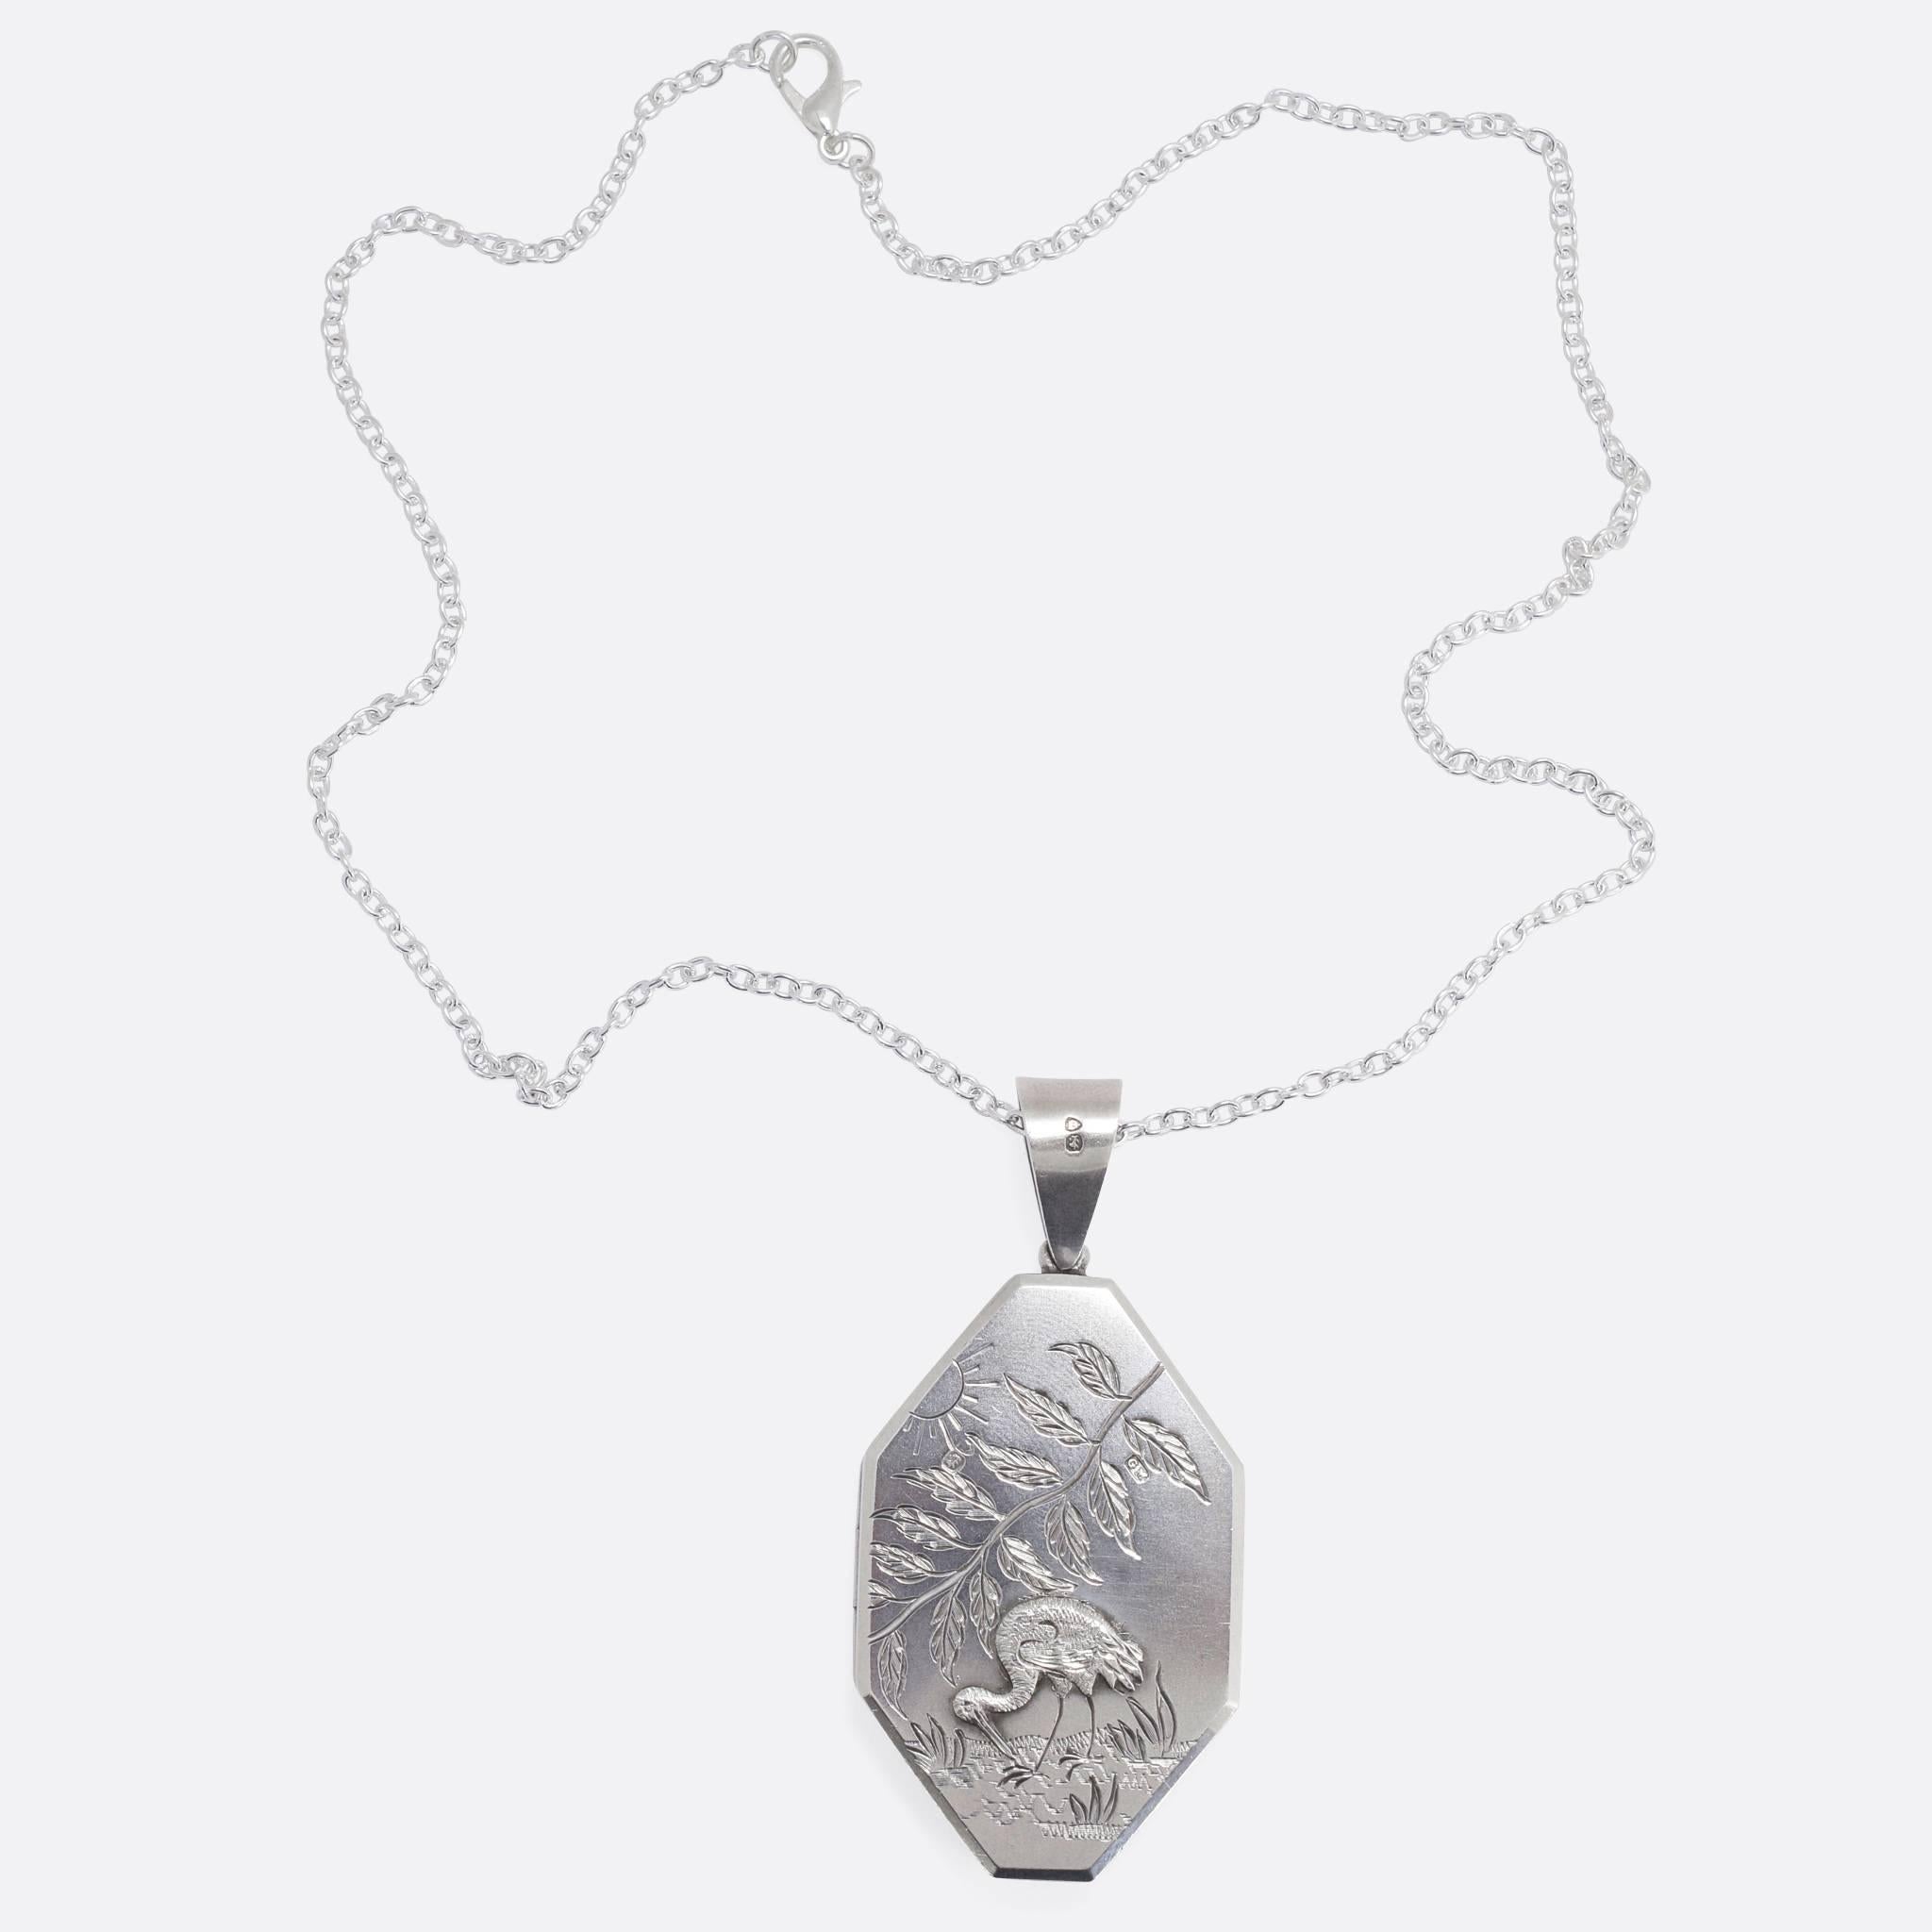 A cool antique octagonal locket in Sterling Silver. The face depicts a stork, wading through marshland, beneath a branch with leaves and a stylised sun - all beautifully hand-chased. With clear London hallmarks dating to the year 1879, and complete